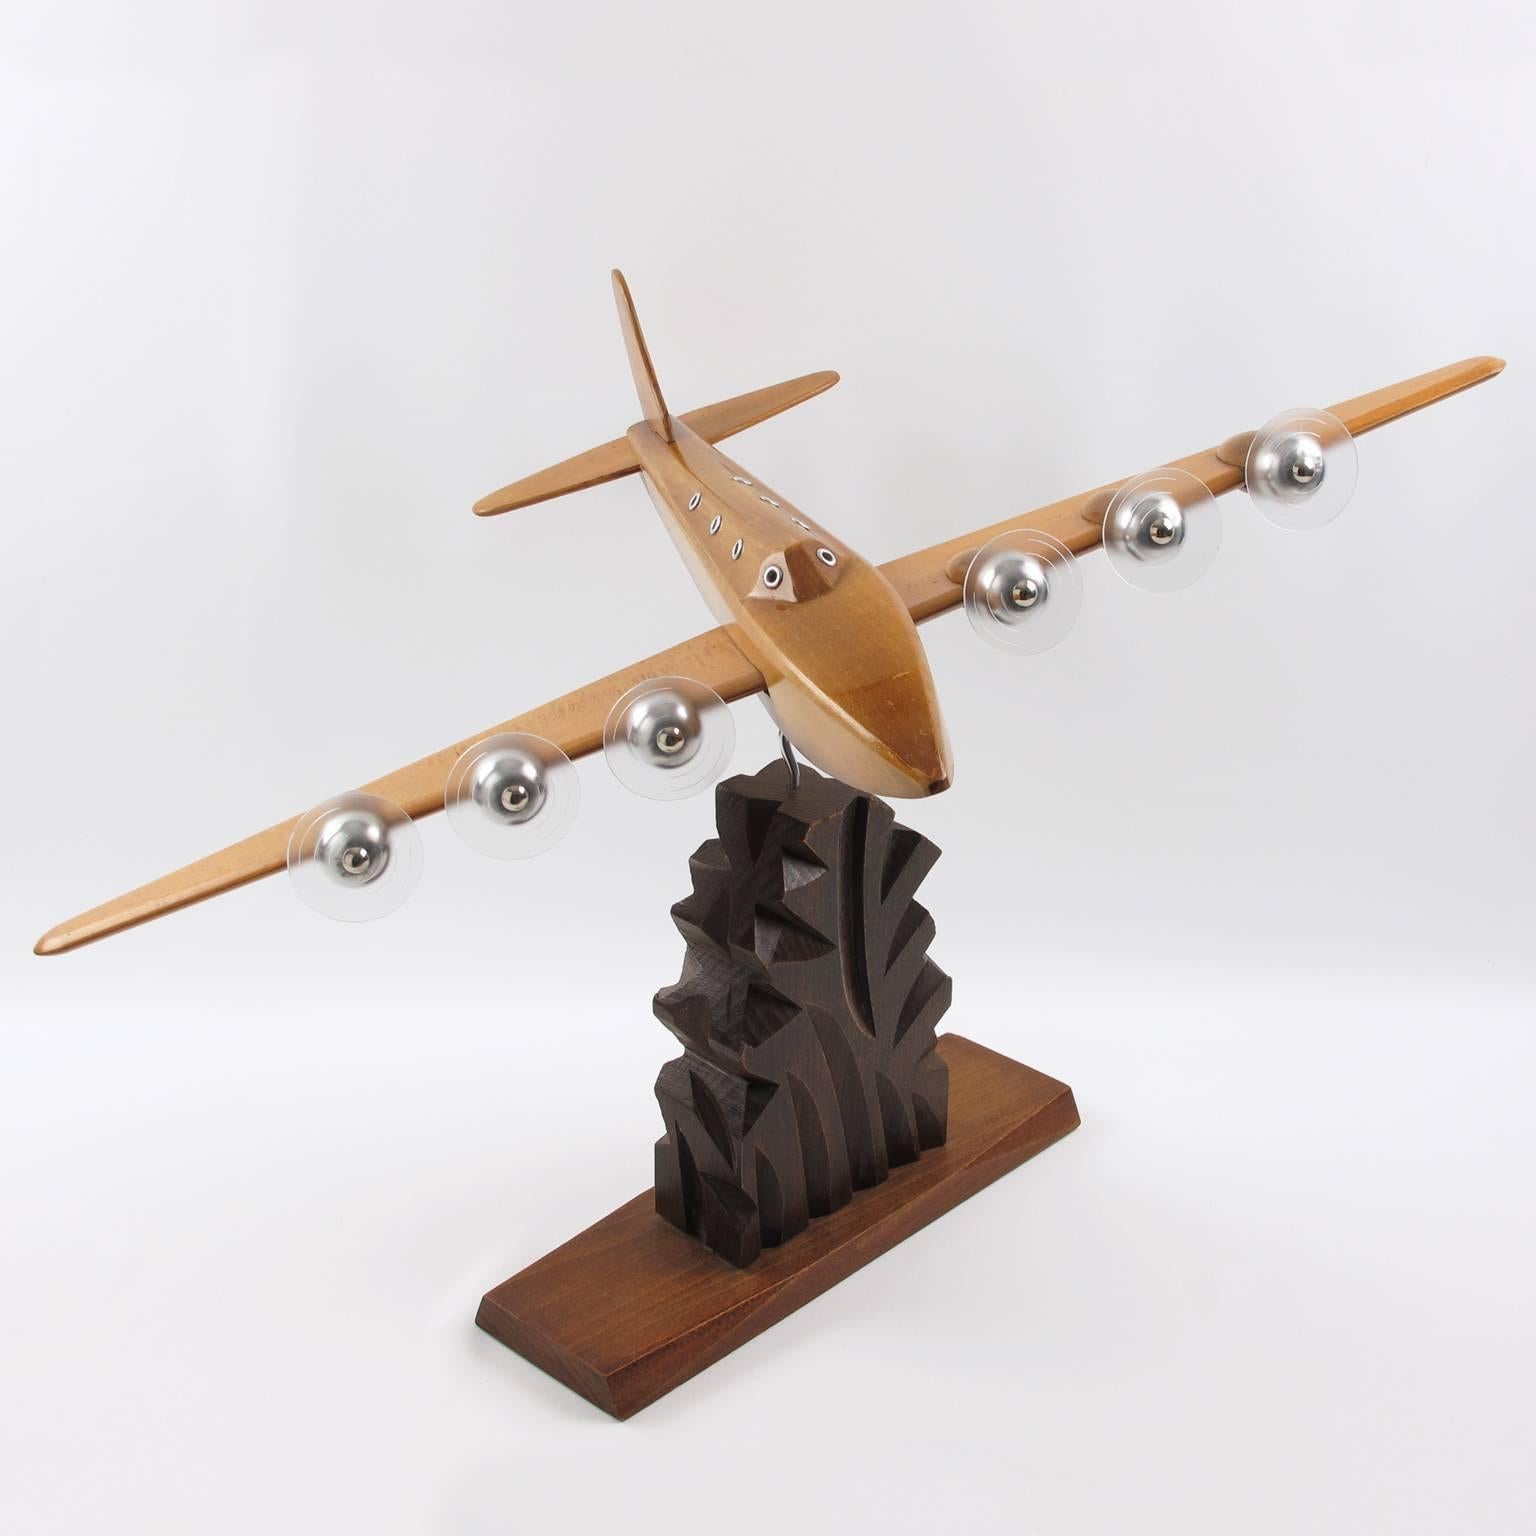 Stylish Art Deco wooden airplane model, mounted on a stylized wooden plinth by Anthoine Art Bois Studio. This large Art Deco Model airplane is made with solid light varnish wood and chromed metal accents. It has six Lucite propellers (note original